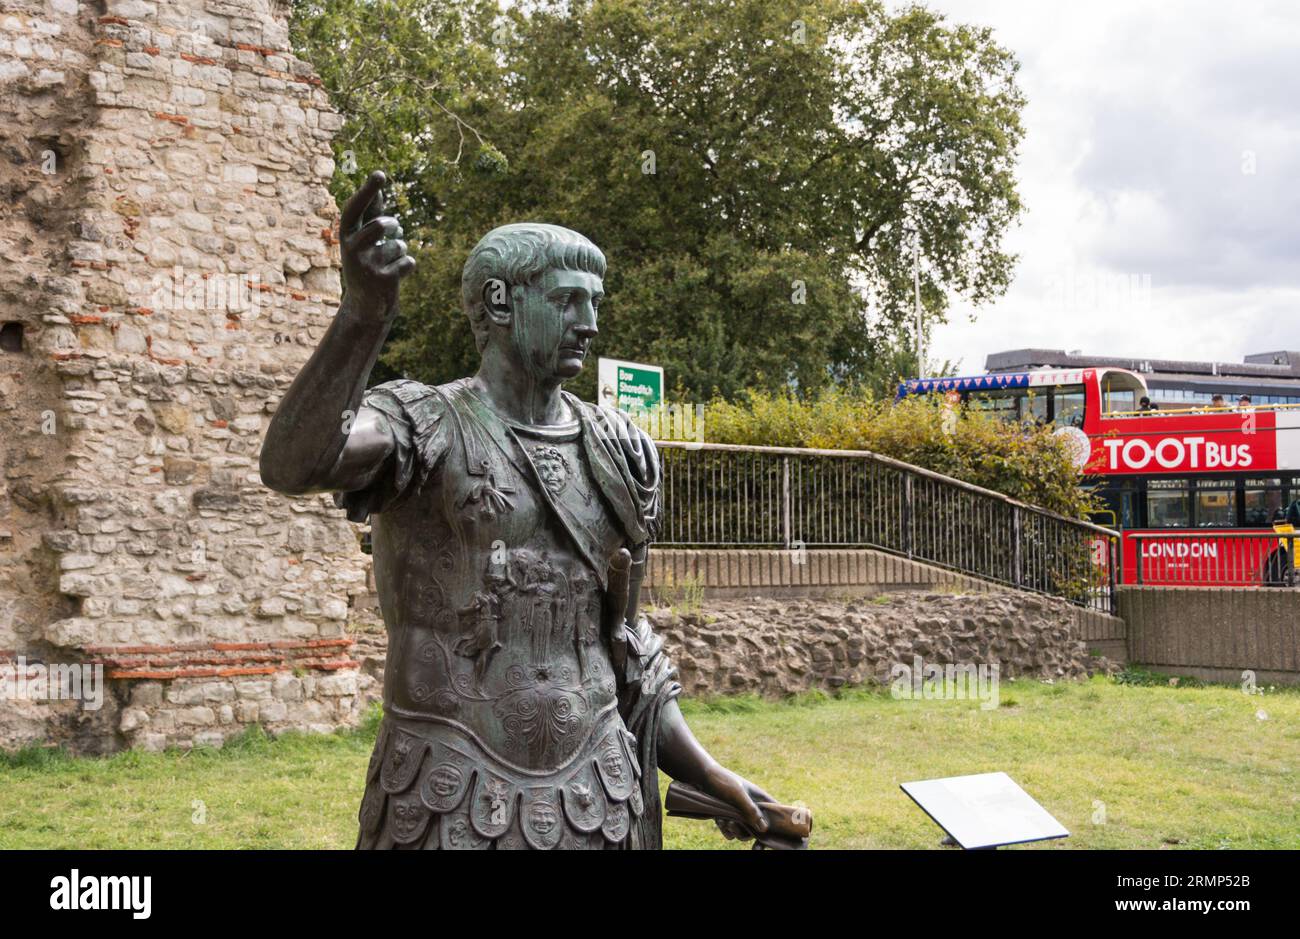 A life size bronze statue on Tower Hill believed to be that of the Roman Emperor Trajan, London, England, U.K. Stock Photo